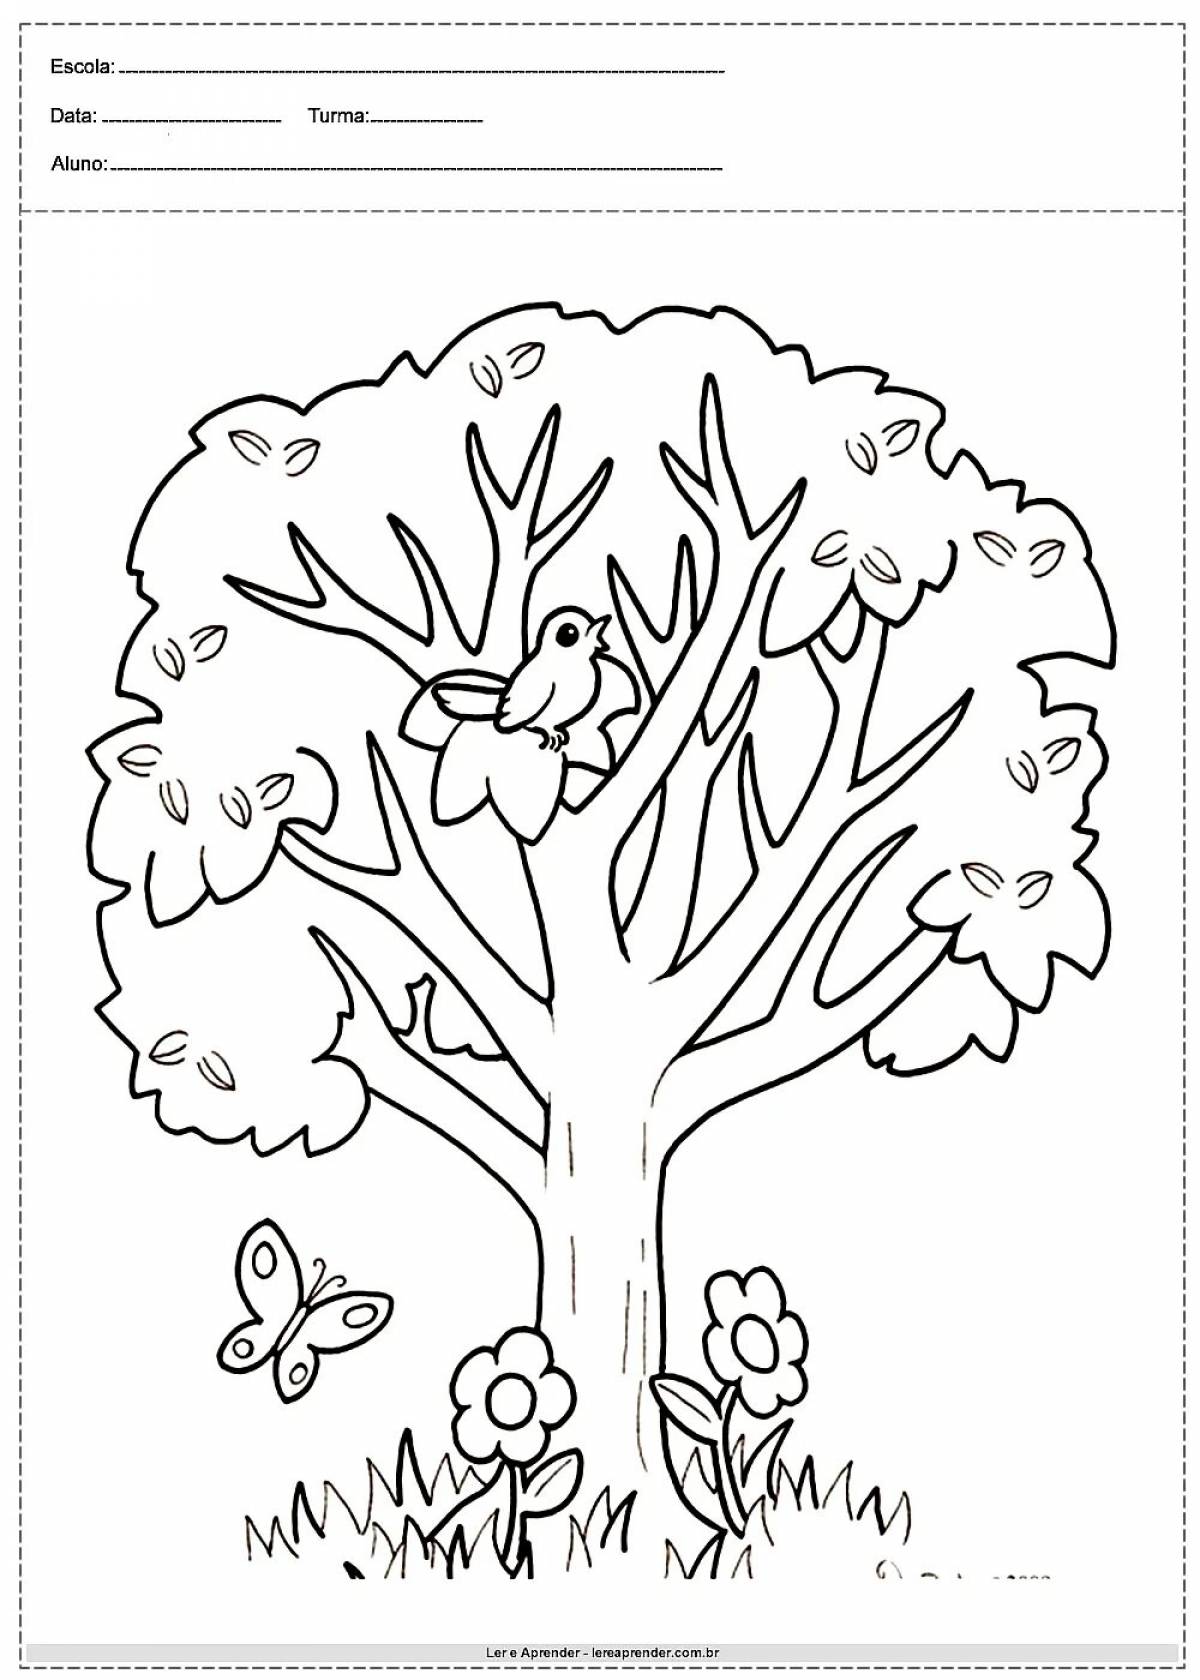 Glowing tree coloring book for children 5-6 years old